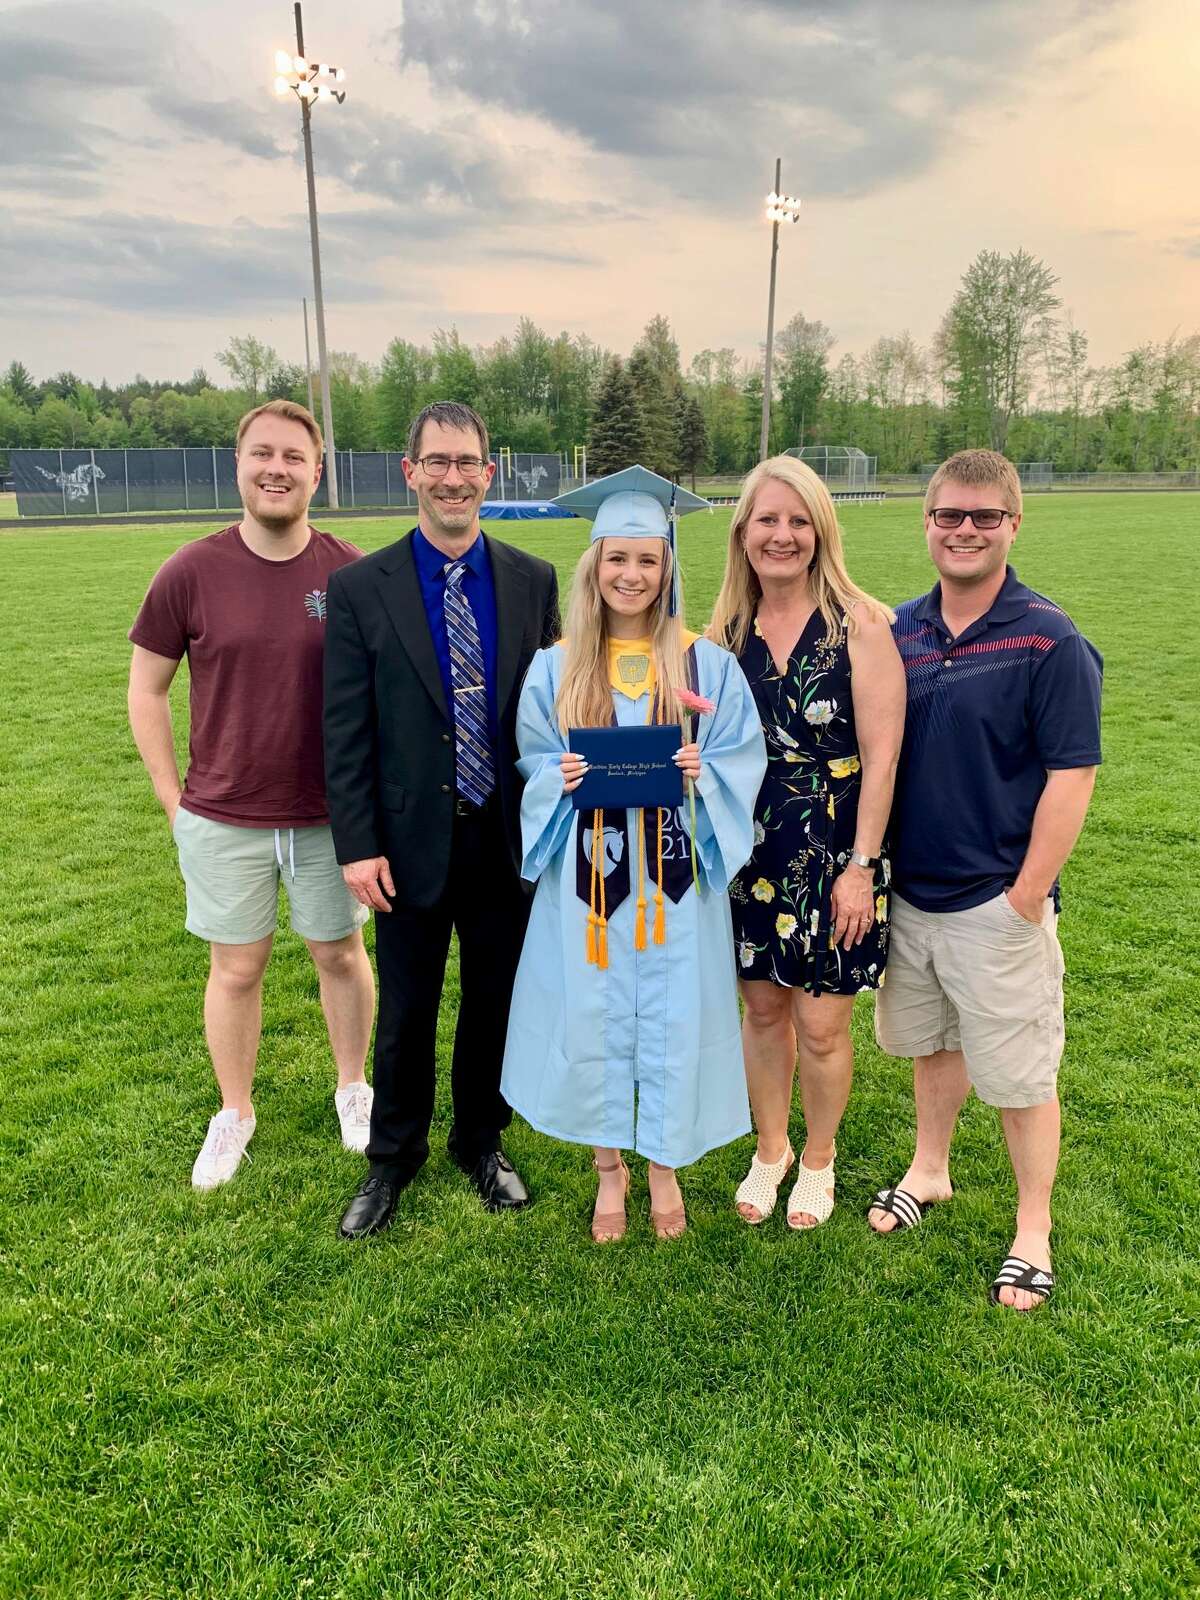 Meridian Junior High School Principal Kent Boxey, second from left, is pictured with his family: from left, son Devin, daughter Dana, wife Amy, and son Donovan.